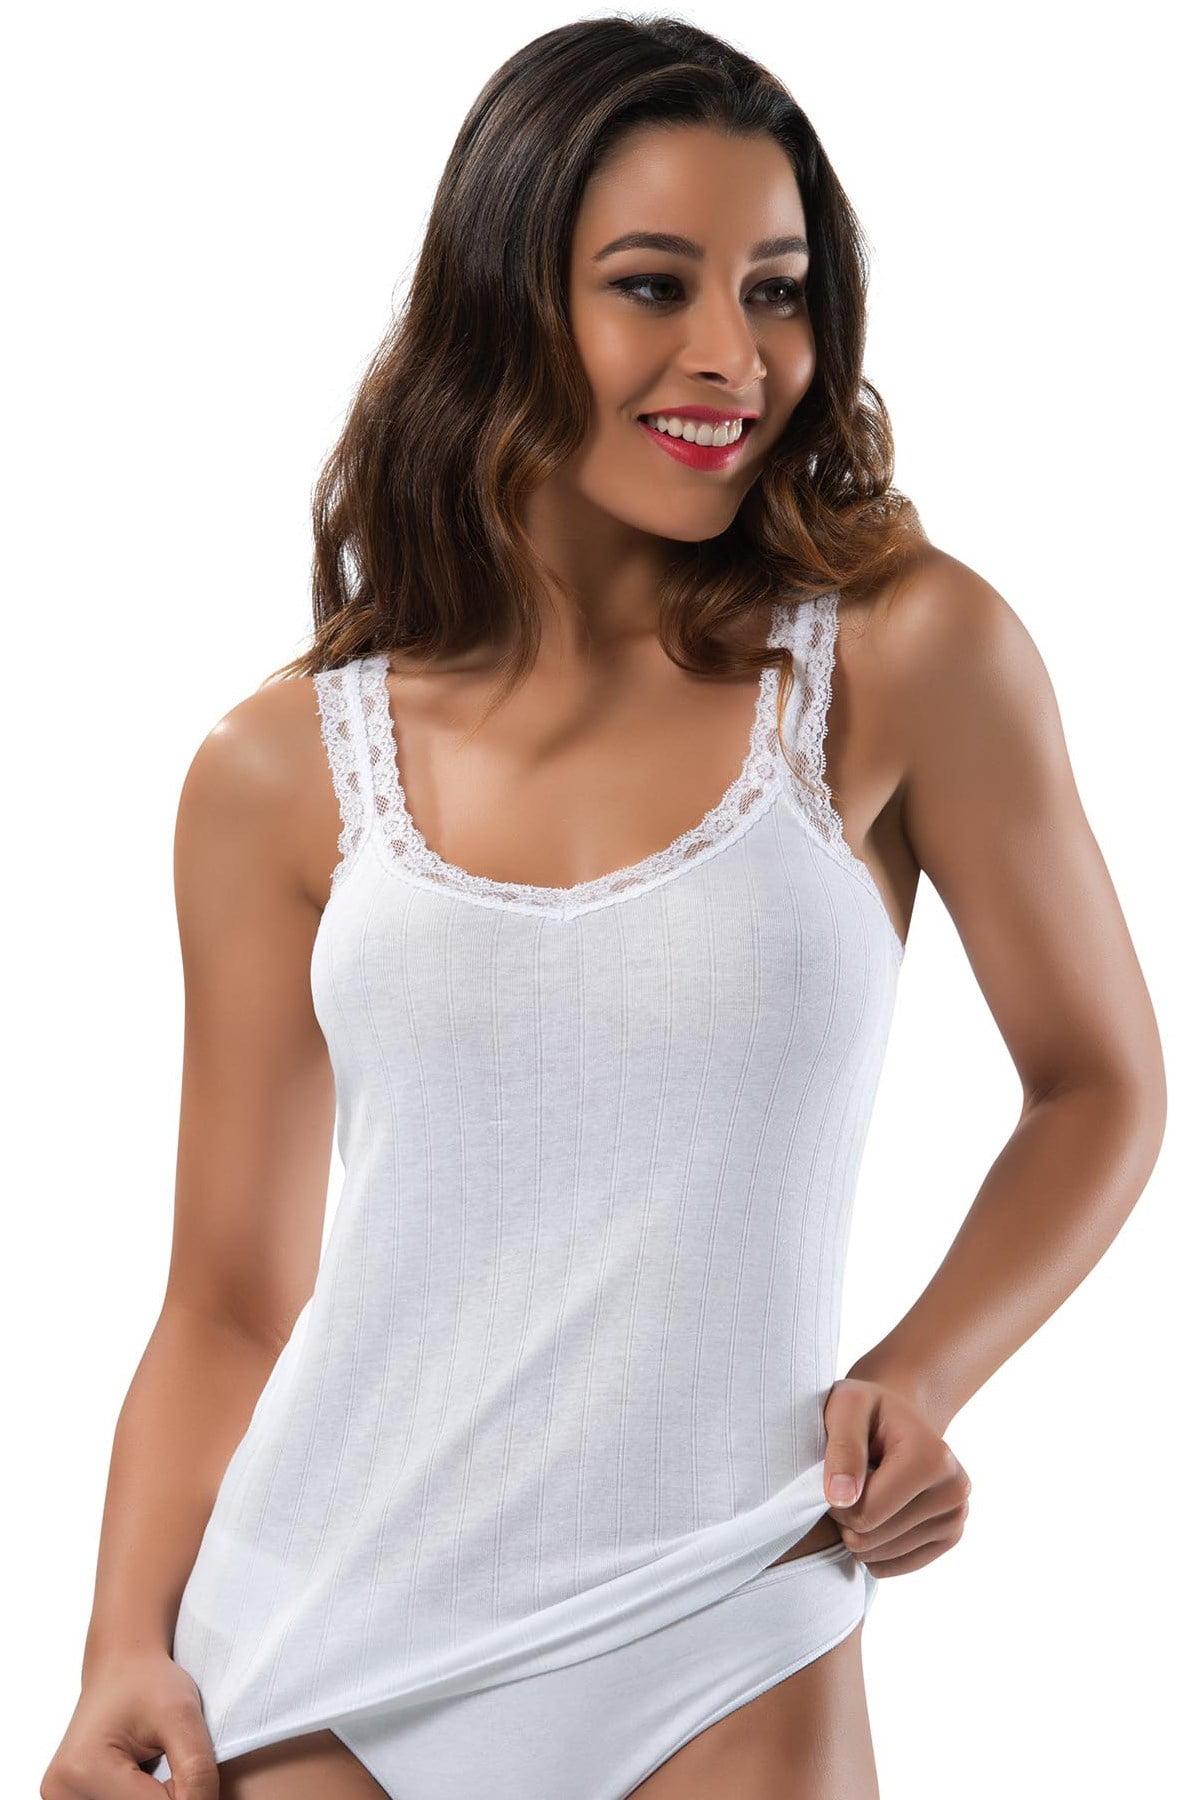 Camisole Cami Undershirt, Airy Soft Comfy Tank Tops